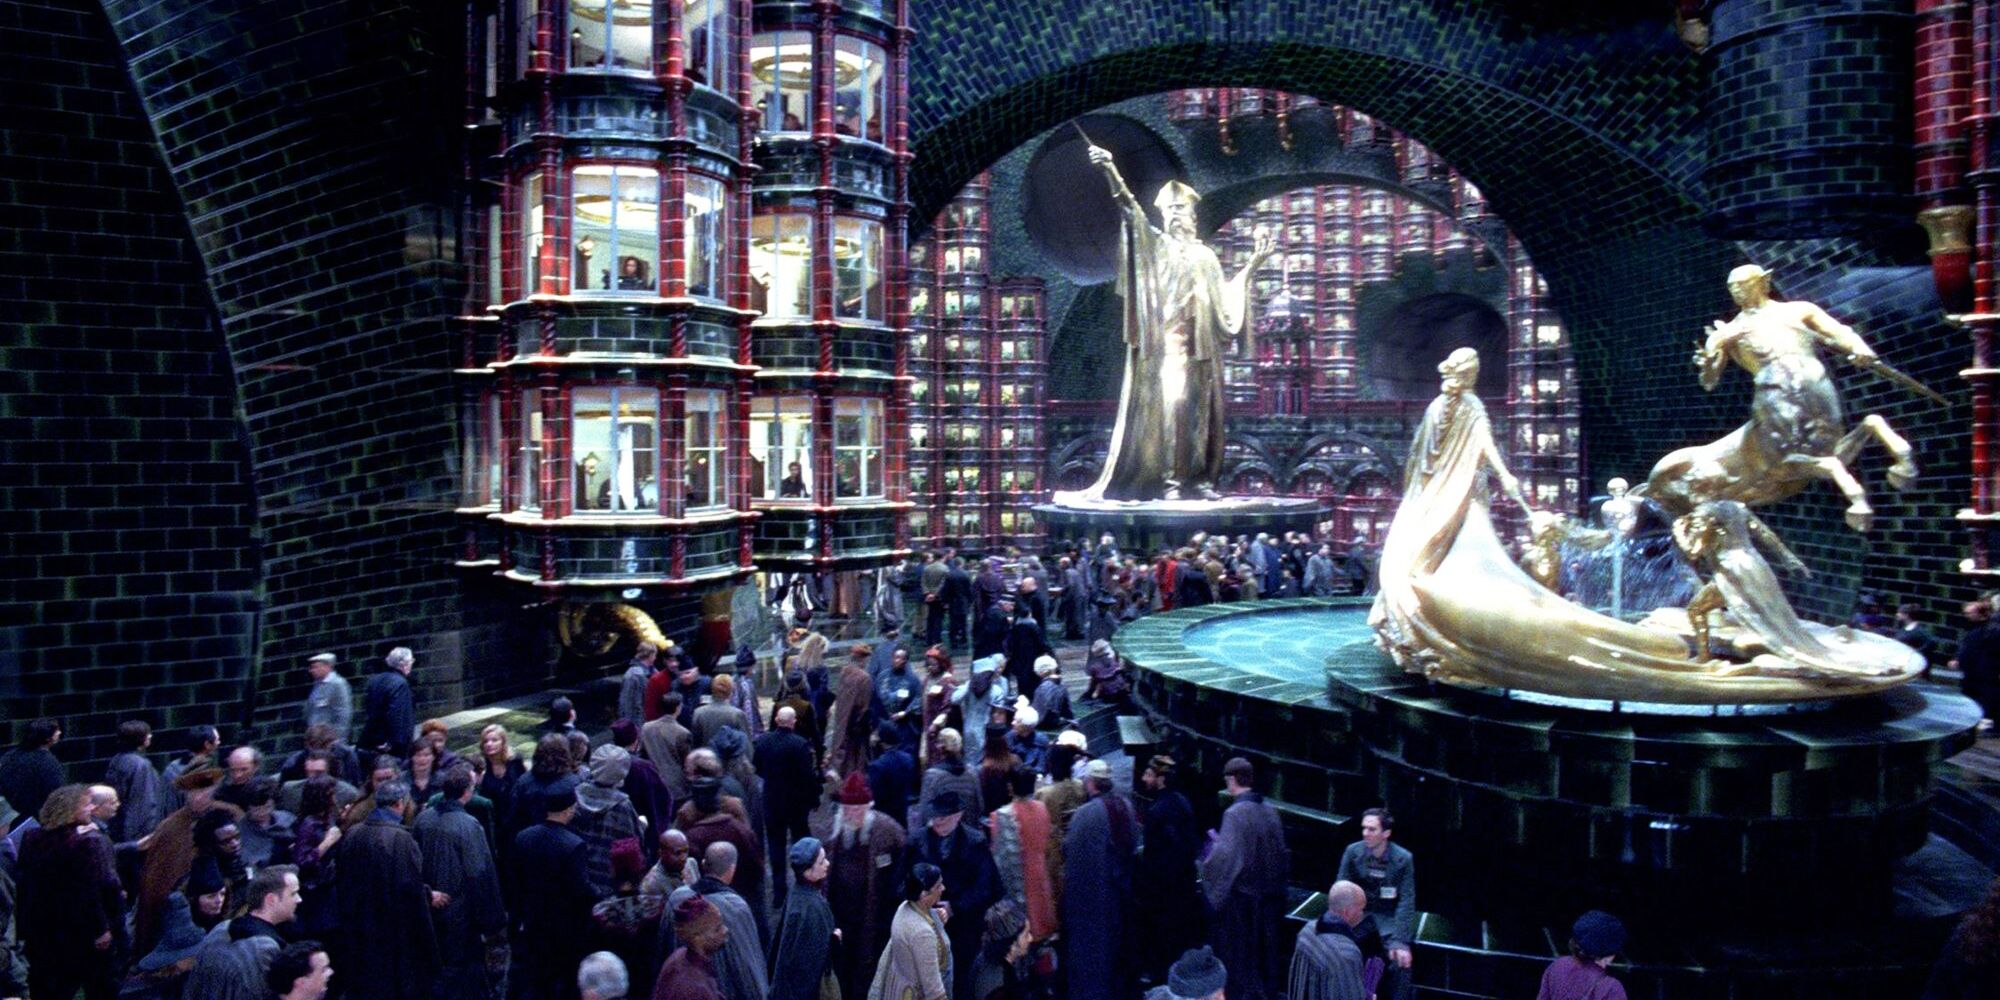 The Ministry of Magic in Harry Potter and the Deathly Hallows.